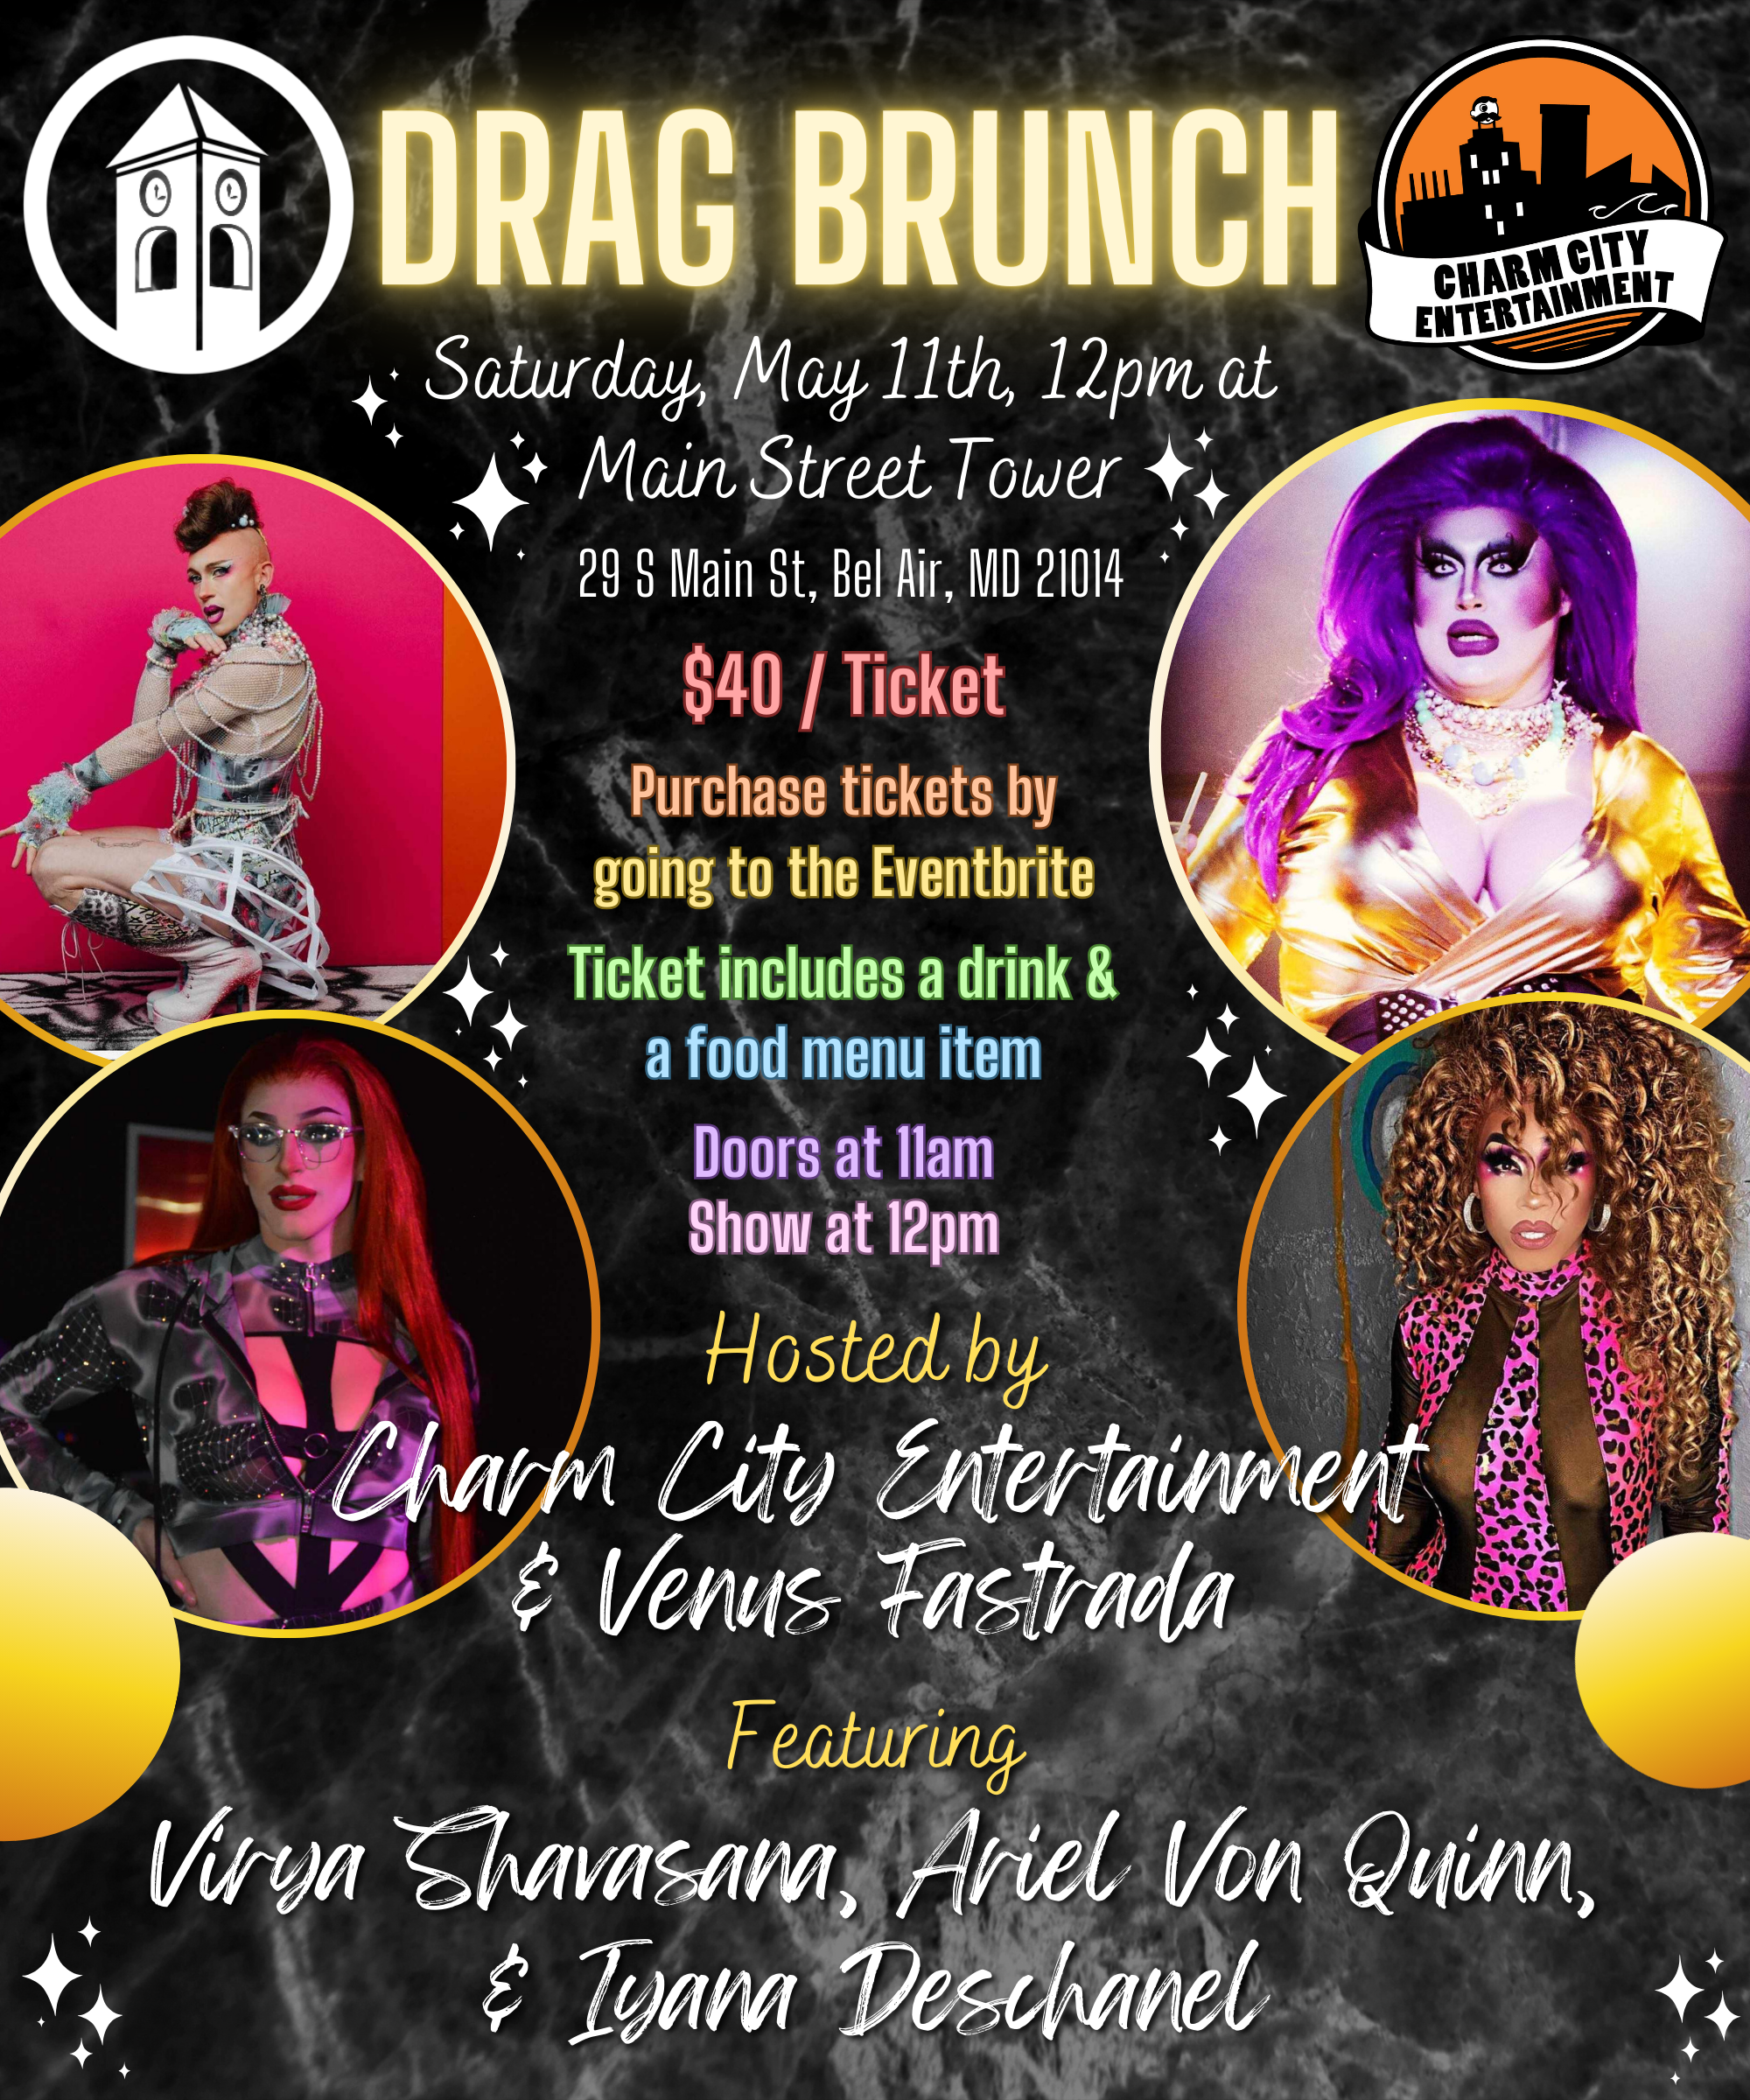 a black background with a marble texture, sparkles, the Charm City Entertainment logo, the Main Street Tower logo, photos of the four Queens, and light yellow, white, and pastel rainbow text. The text reads: Drag Brunch. Saturday, May 11th, 12pm at Main Street Tower. 29 S Main St, Bel Air, MD, 21014. Purchase tickets by going to the Eventbrite. Ticket includes a drink & a food menu item. Doors at 11am. Show at 12pm. Hosted by Charm City Entertainment & Venus Fastrada. Featuring Virya Shavasana, Ariel Von Quinn, & Iyana Deschanel.